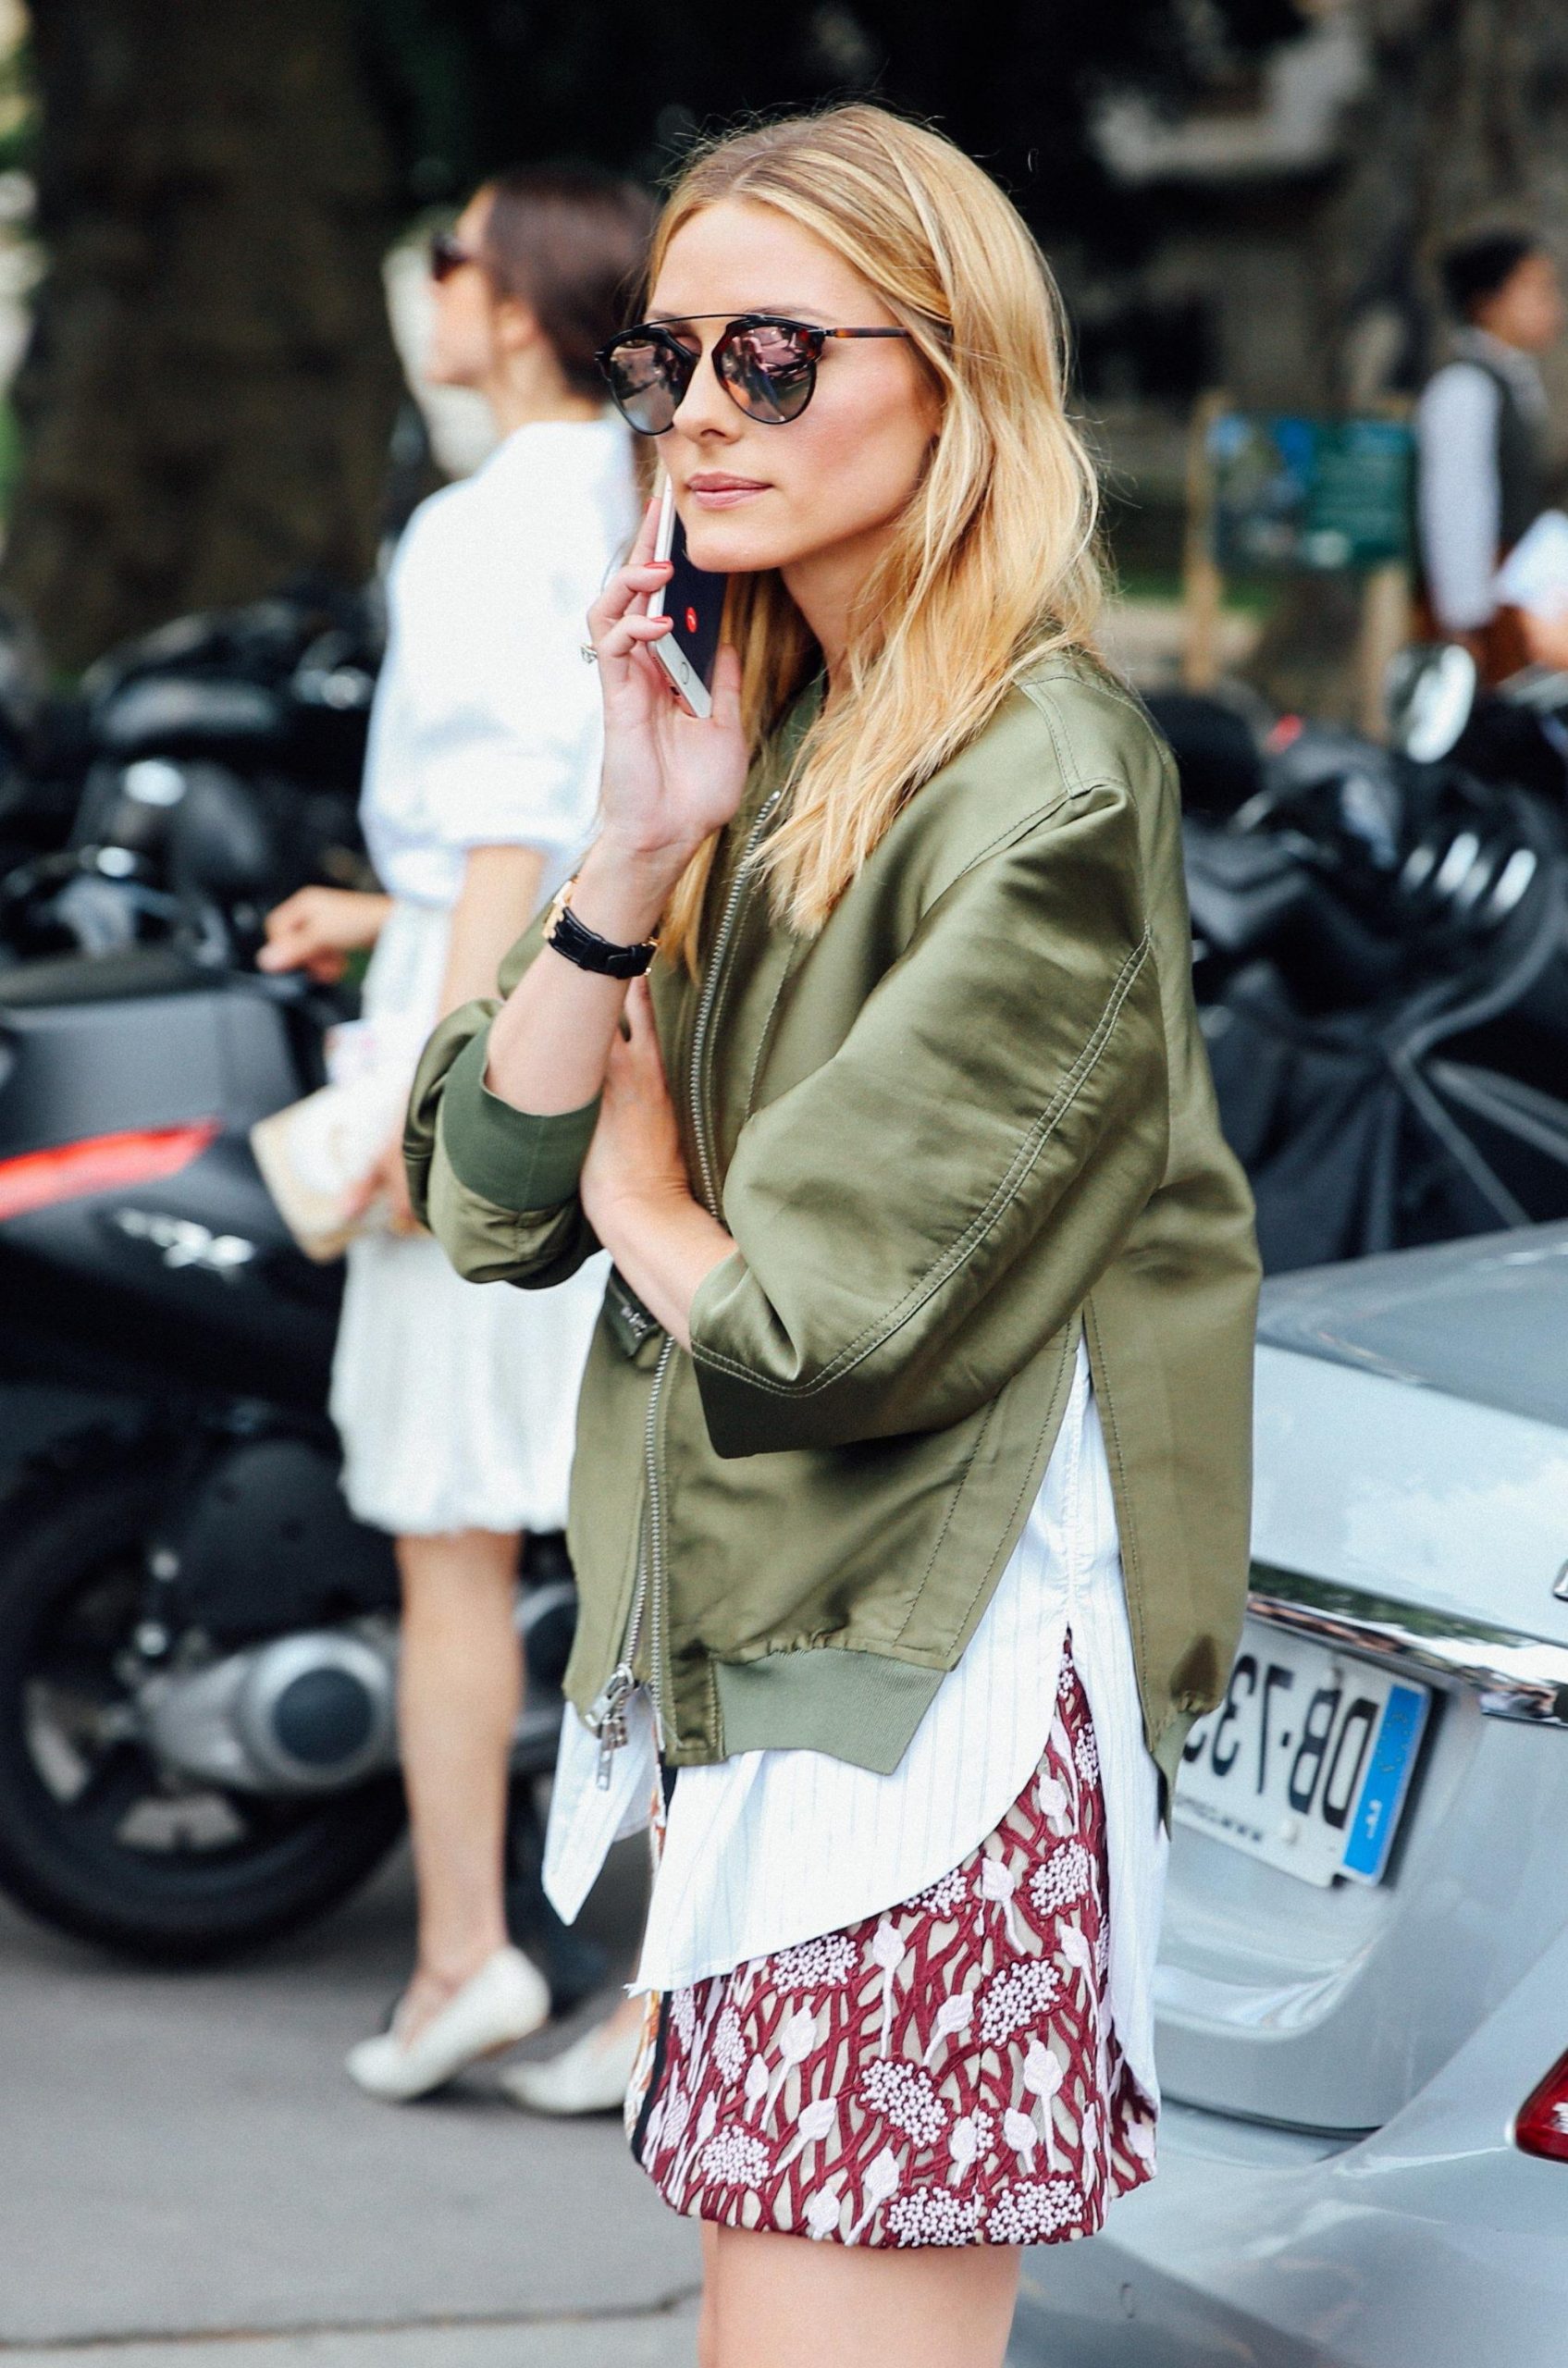 Are Bomber Jackets In Style For Women 2022